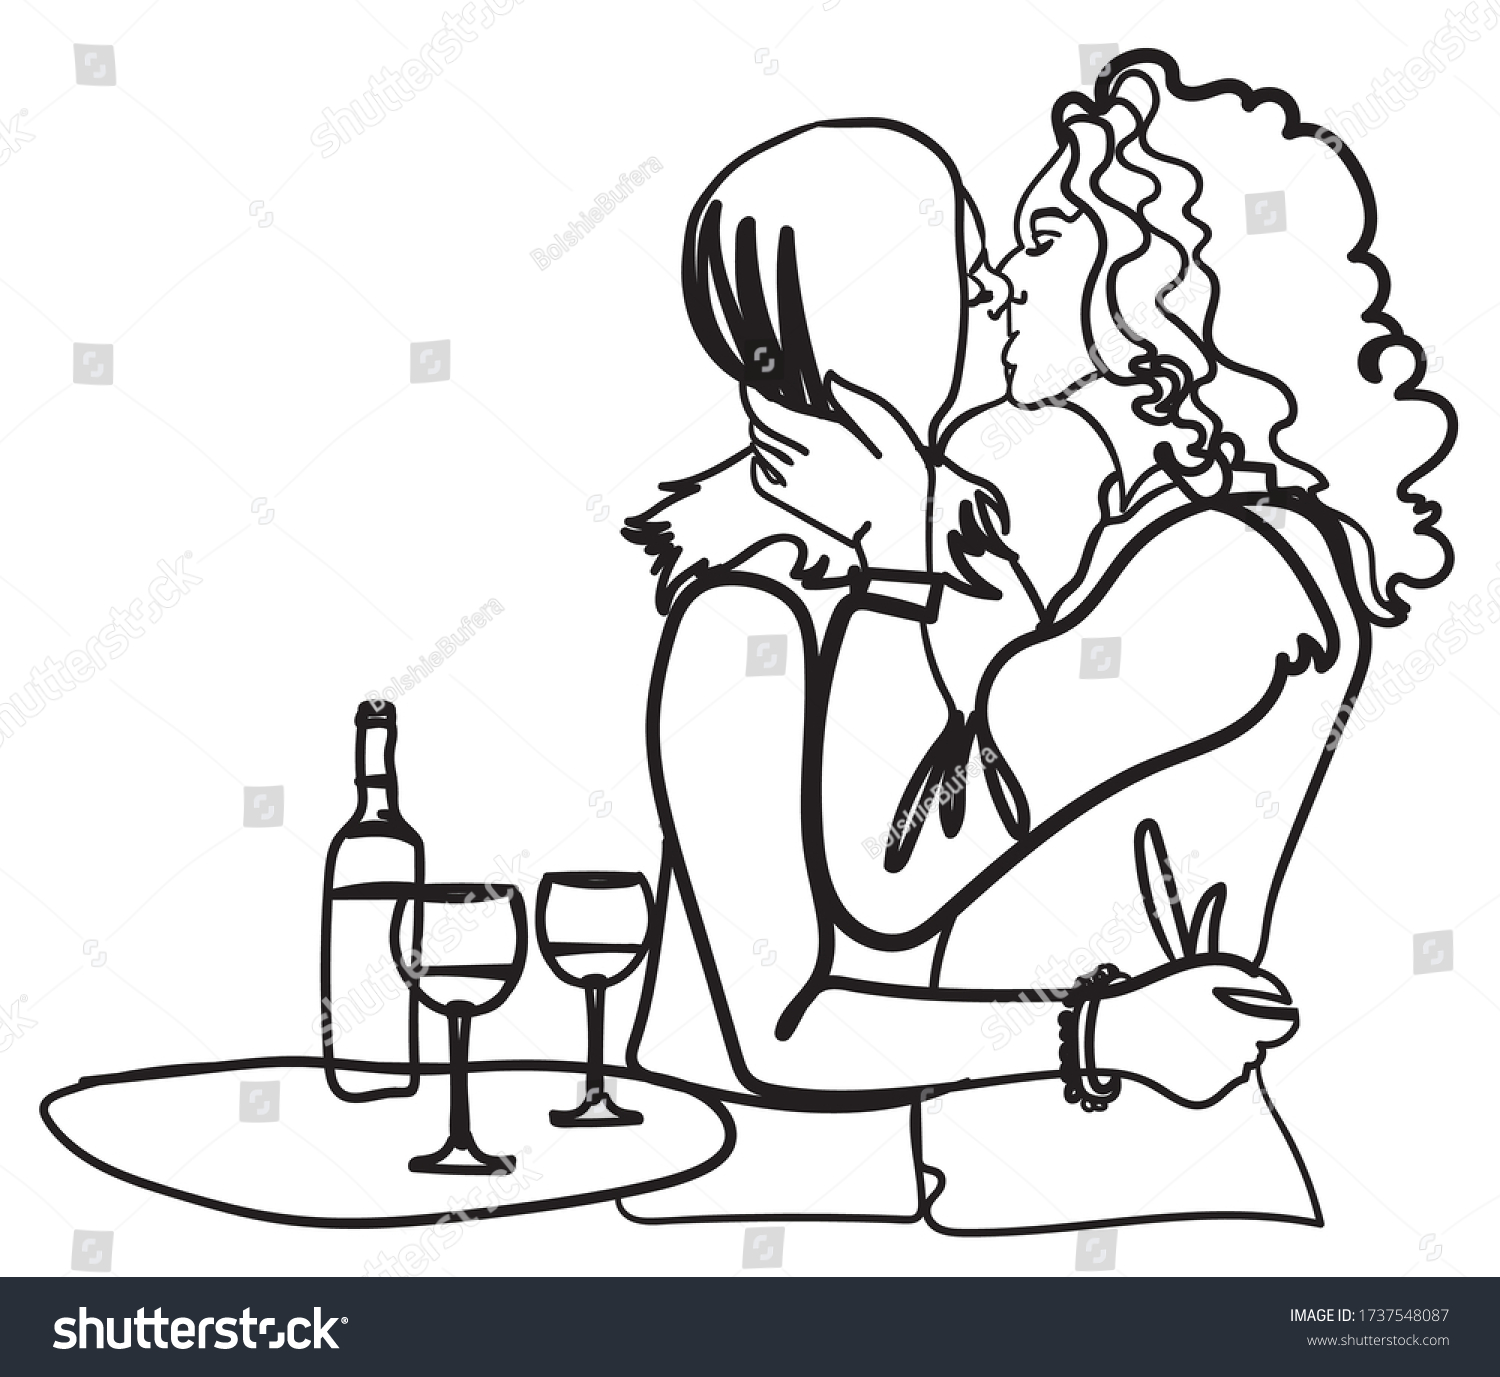 Two Girls Kiss Each Other One Stock Vector Royalty Free 1737548087 Shutterstock 9349